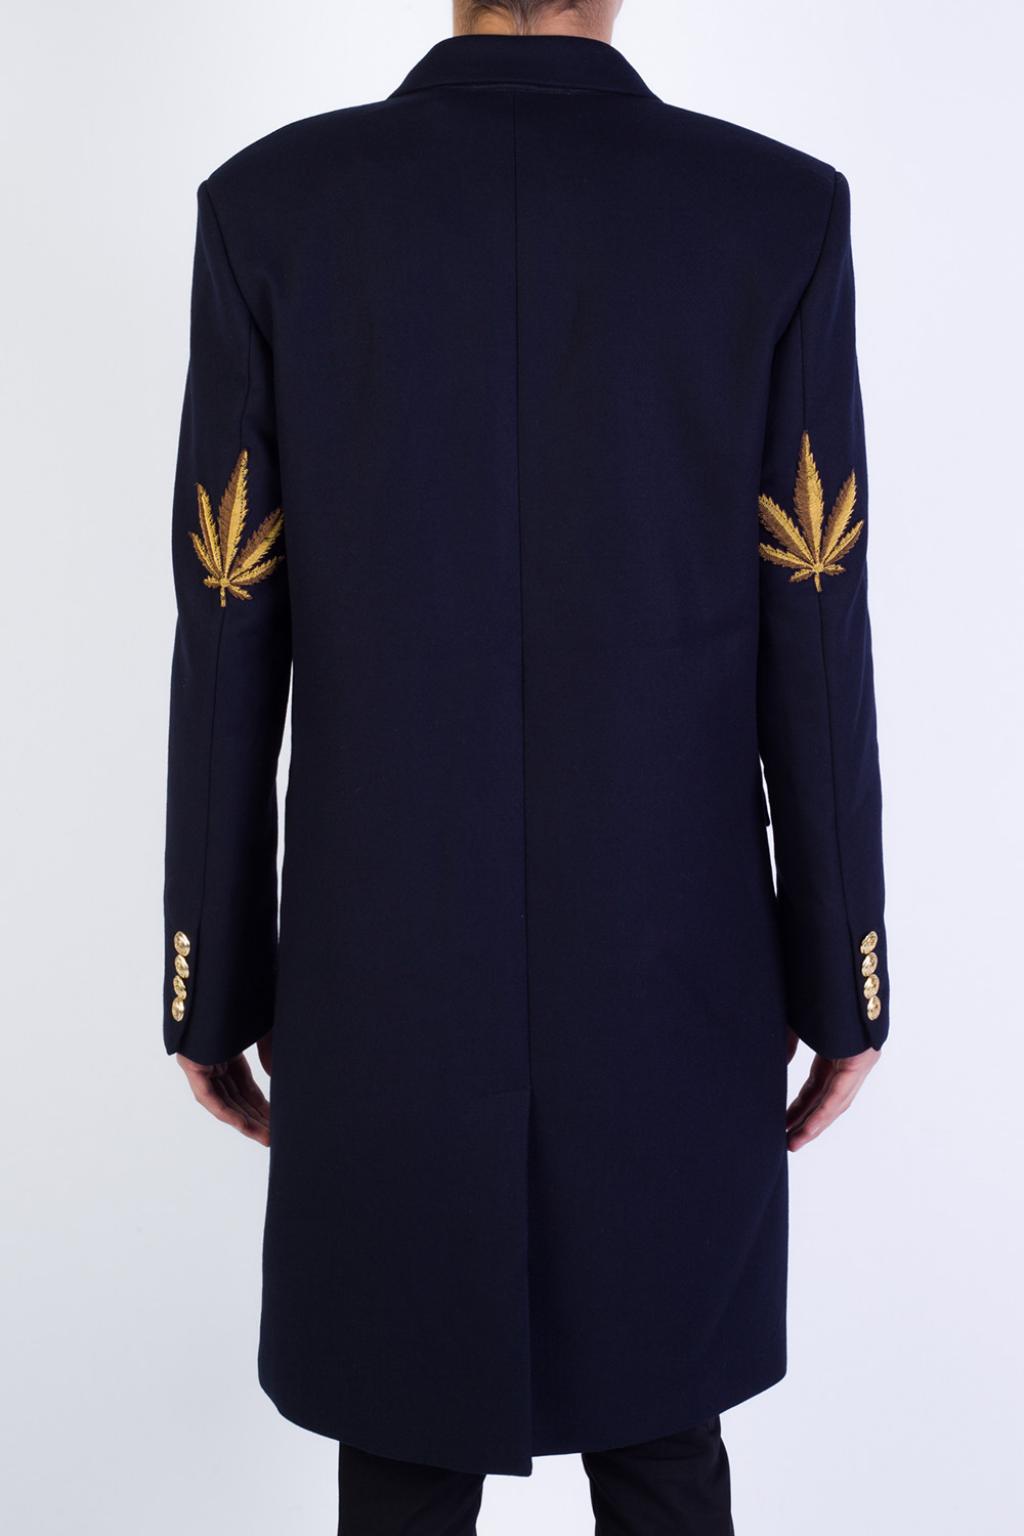 PALMS SHORT COAT in blue - Palm Angels® Official